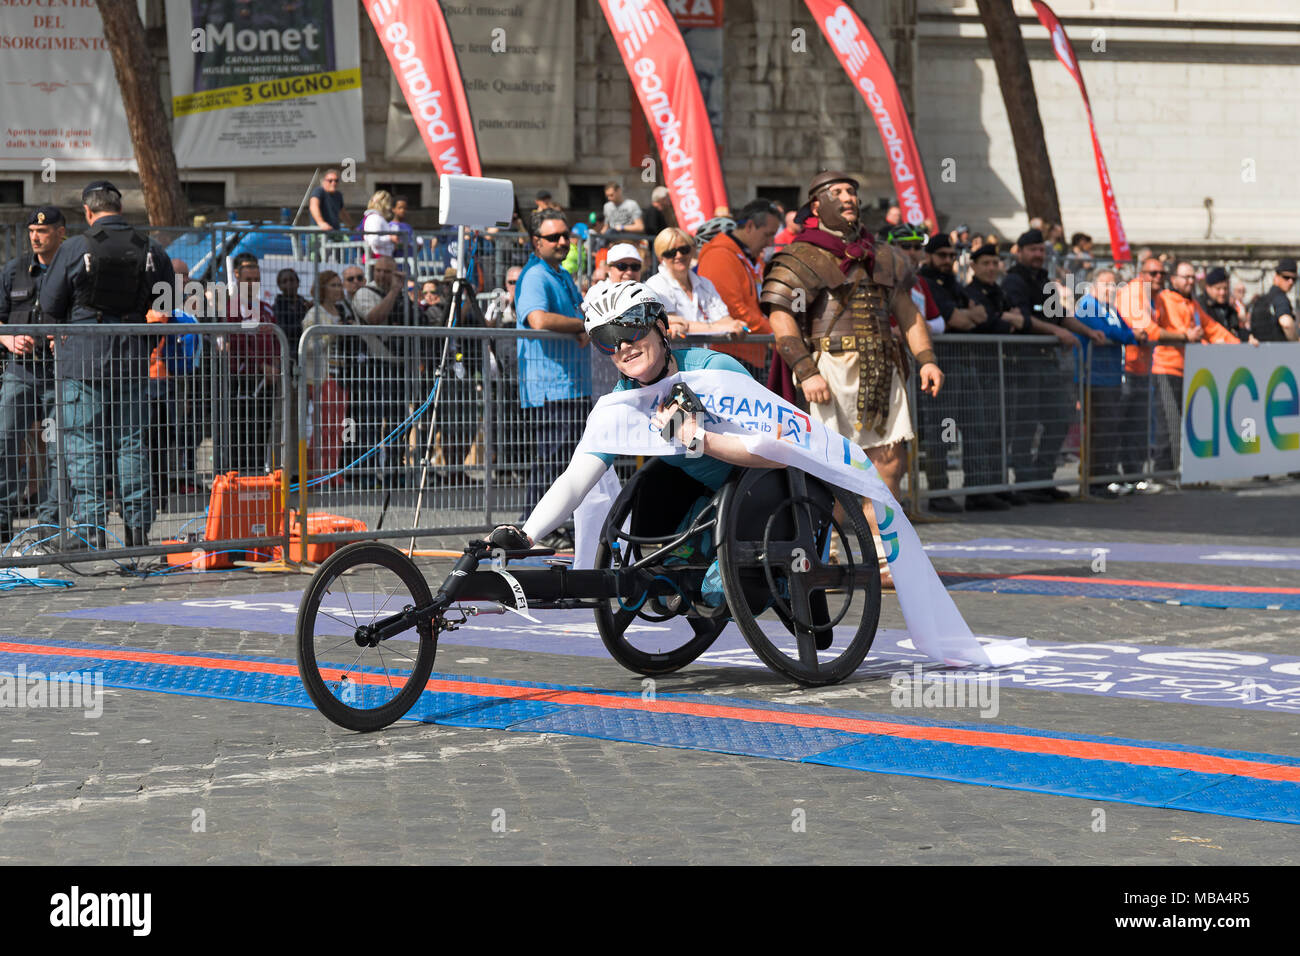 Rome, Italy - 8 April 2018: Margriet Van Den Broek winner of the 24th edition of the Rome Marathon and Run for Fun in the women wheelchair category. Margriet Van Den Broek upon arrival at the finish line. Credit: Polifoto/Alamy Live News Stock Photo